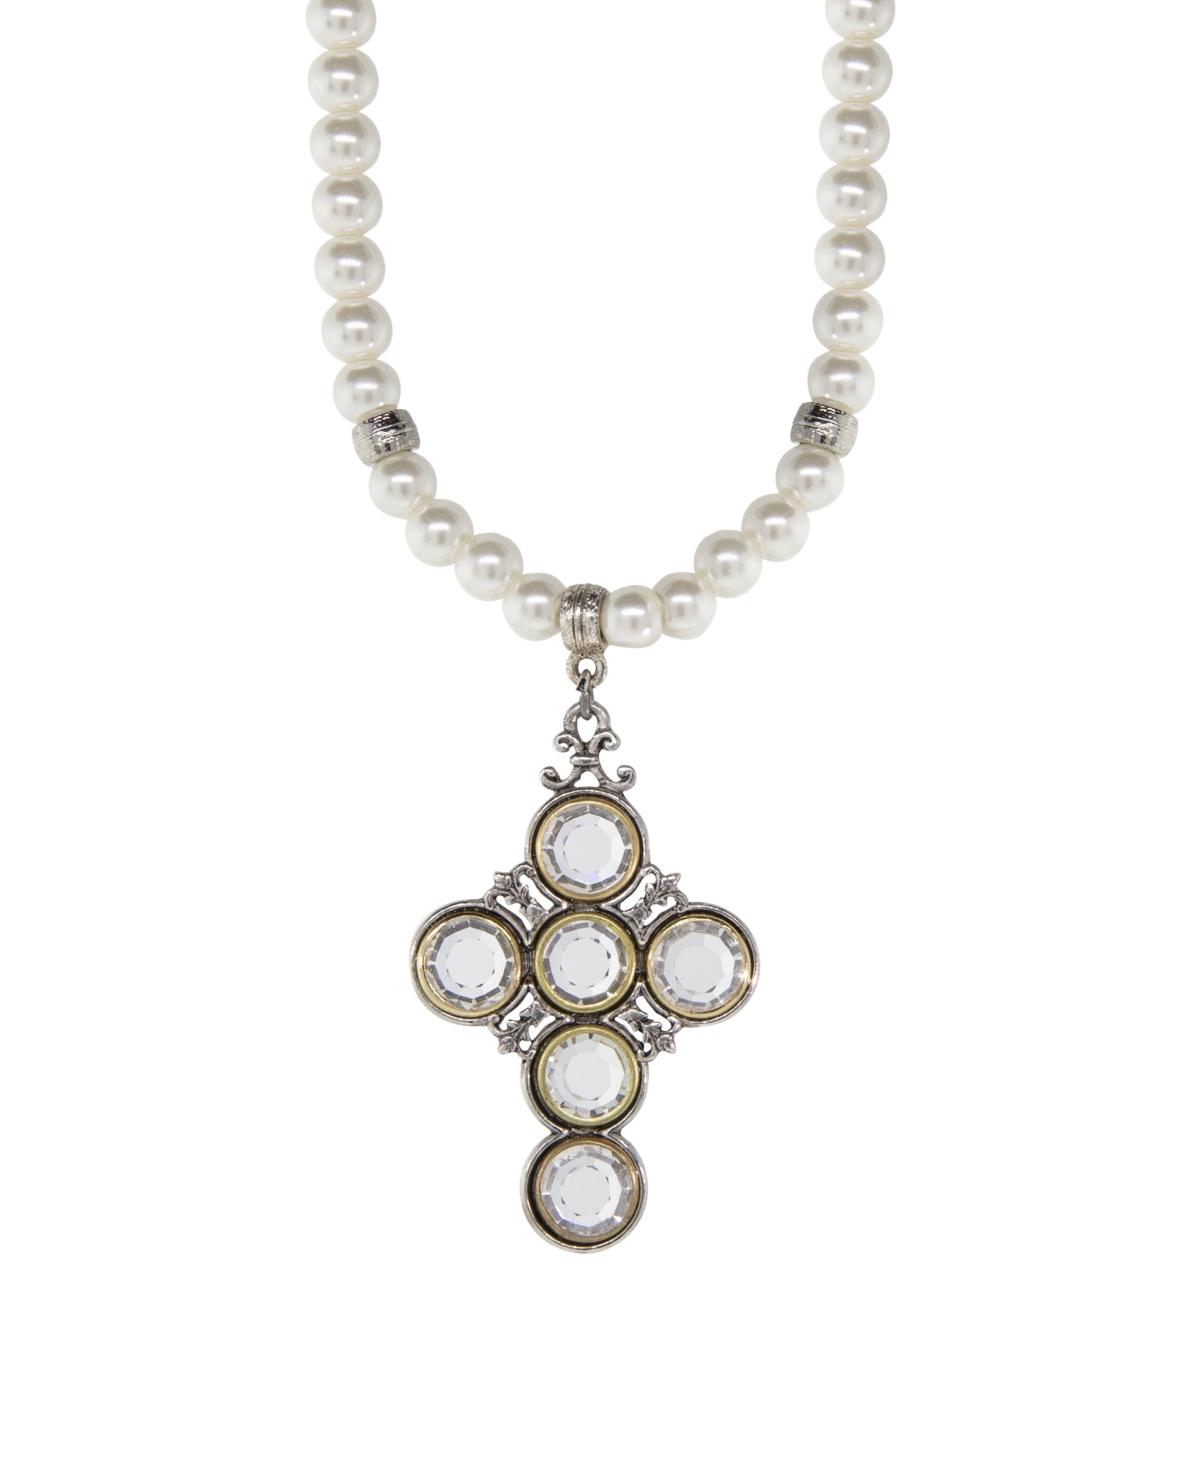 Pewter Cross Imitation Pearl Clear Crystal Necklace - White